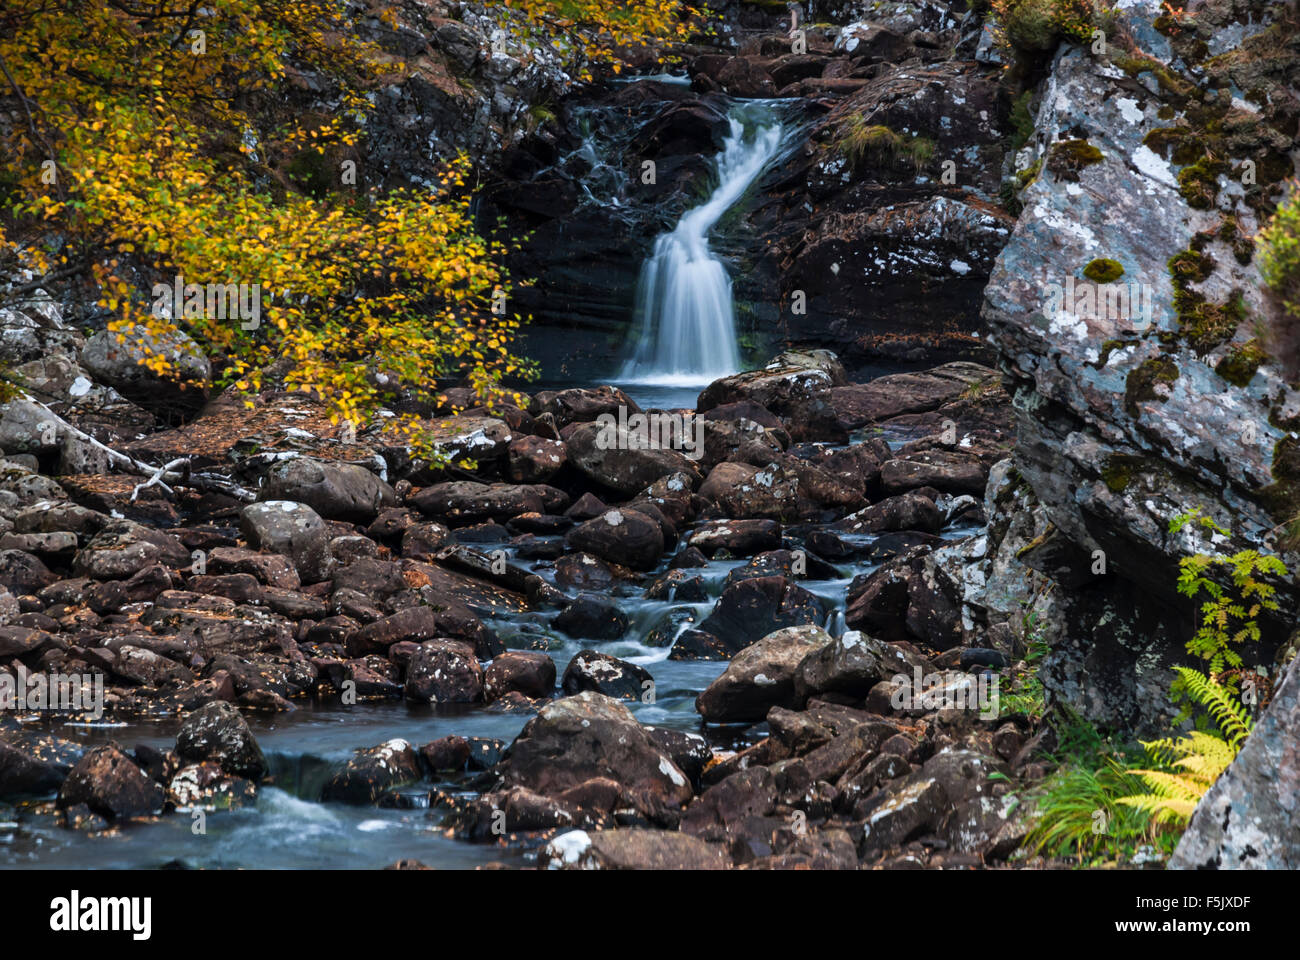 A close up of a small waterfall on a highland burn, Glen Cassley, Sutherland, Scotland. Stock Photo